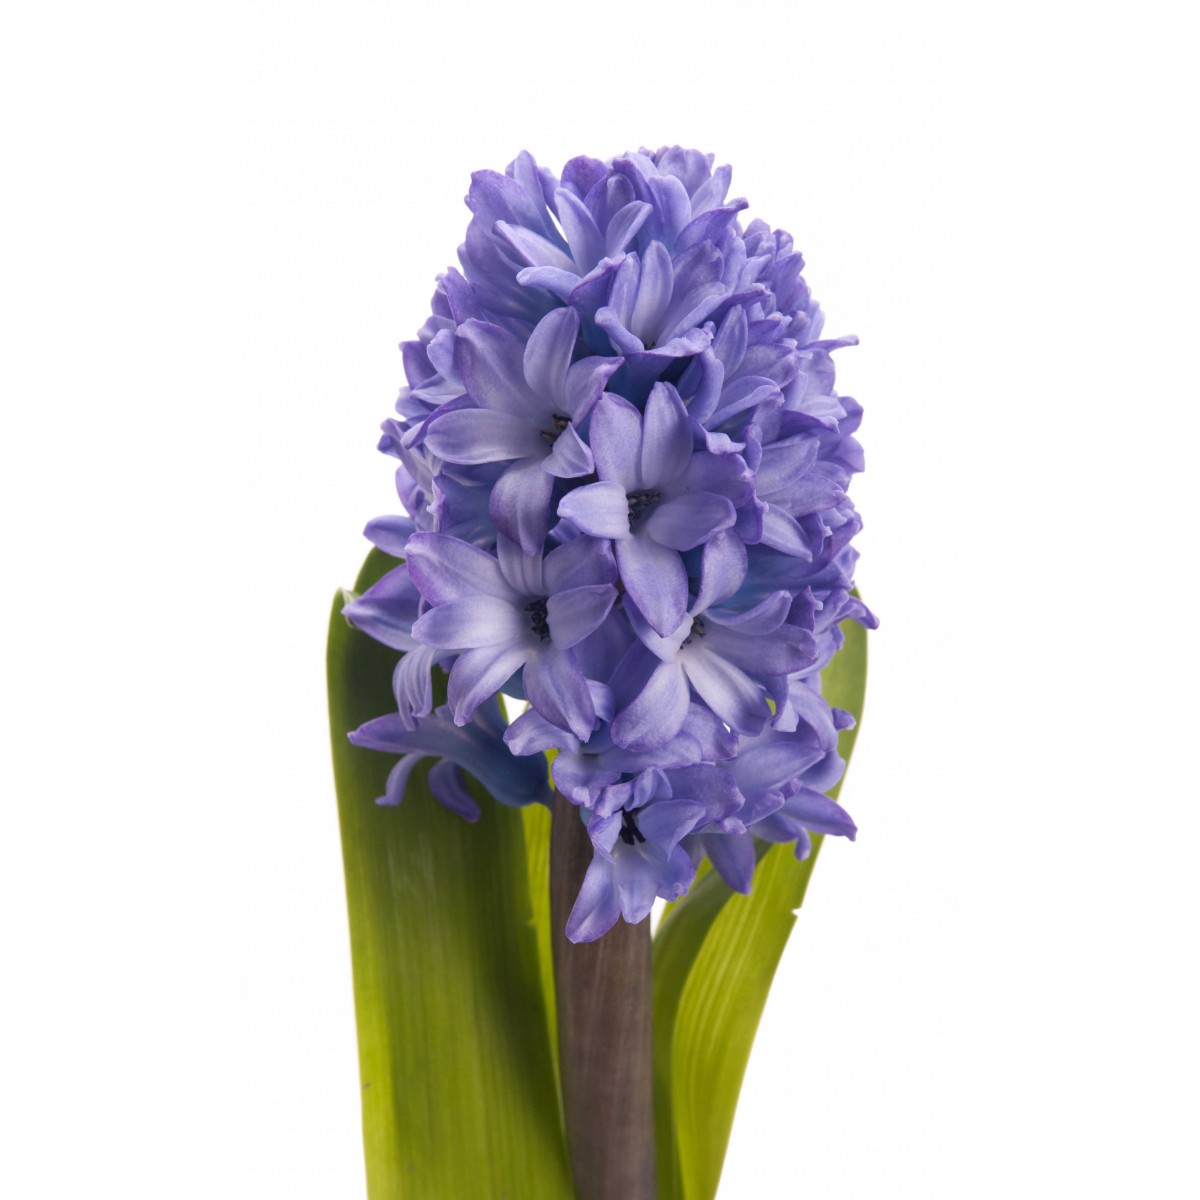 Amazing Hyacinth Pictures & Backgrounds